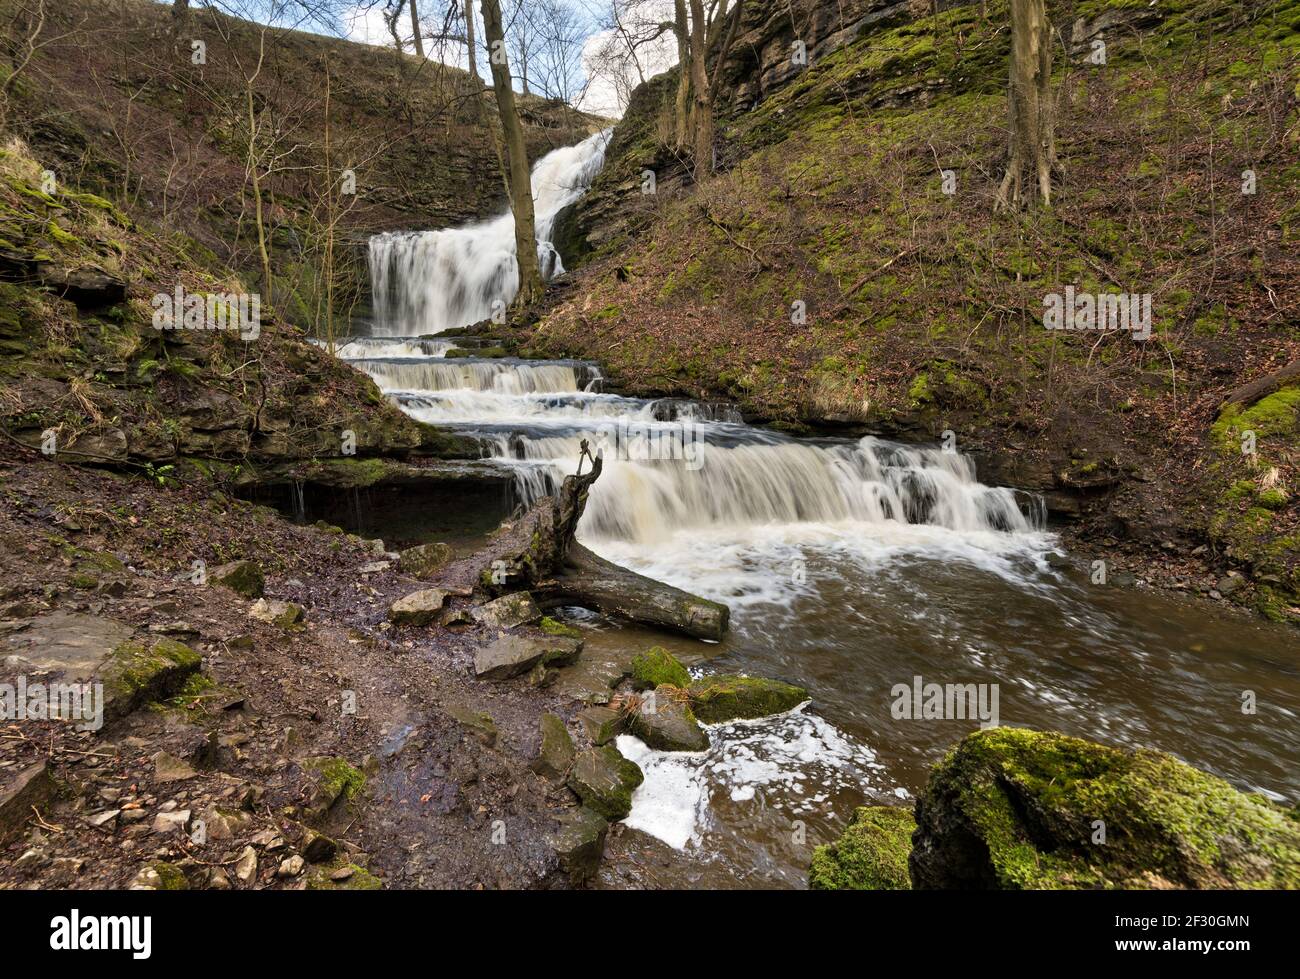 Scaleber Force waterfall, near Settle, Yorkshire Dales National Park, UK. The falls are seen after heavy rain. Stock Photo